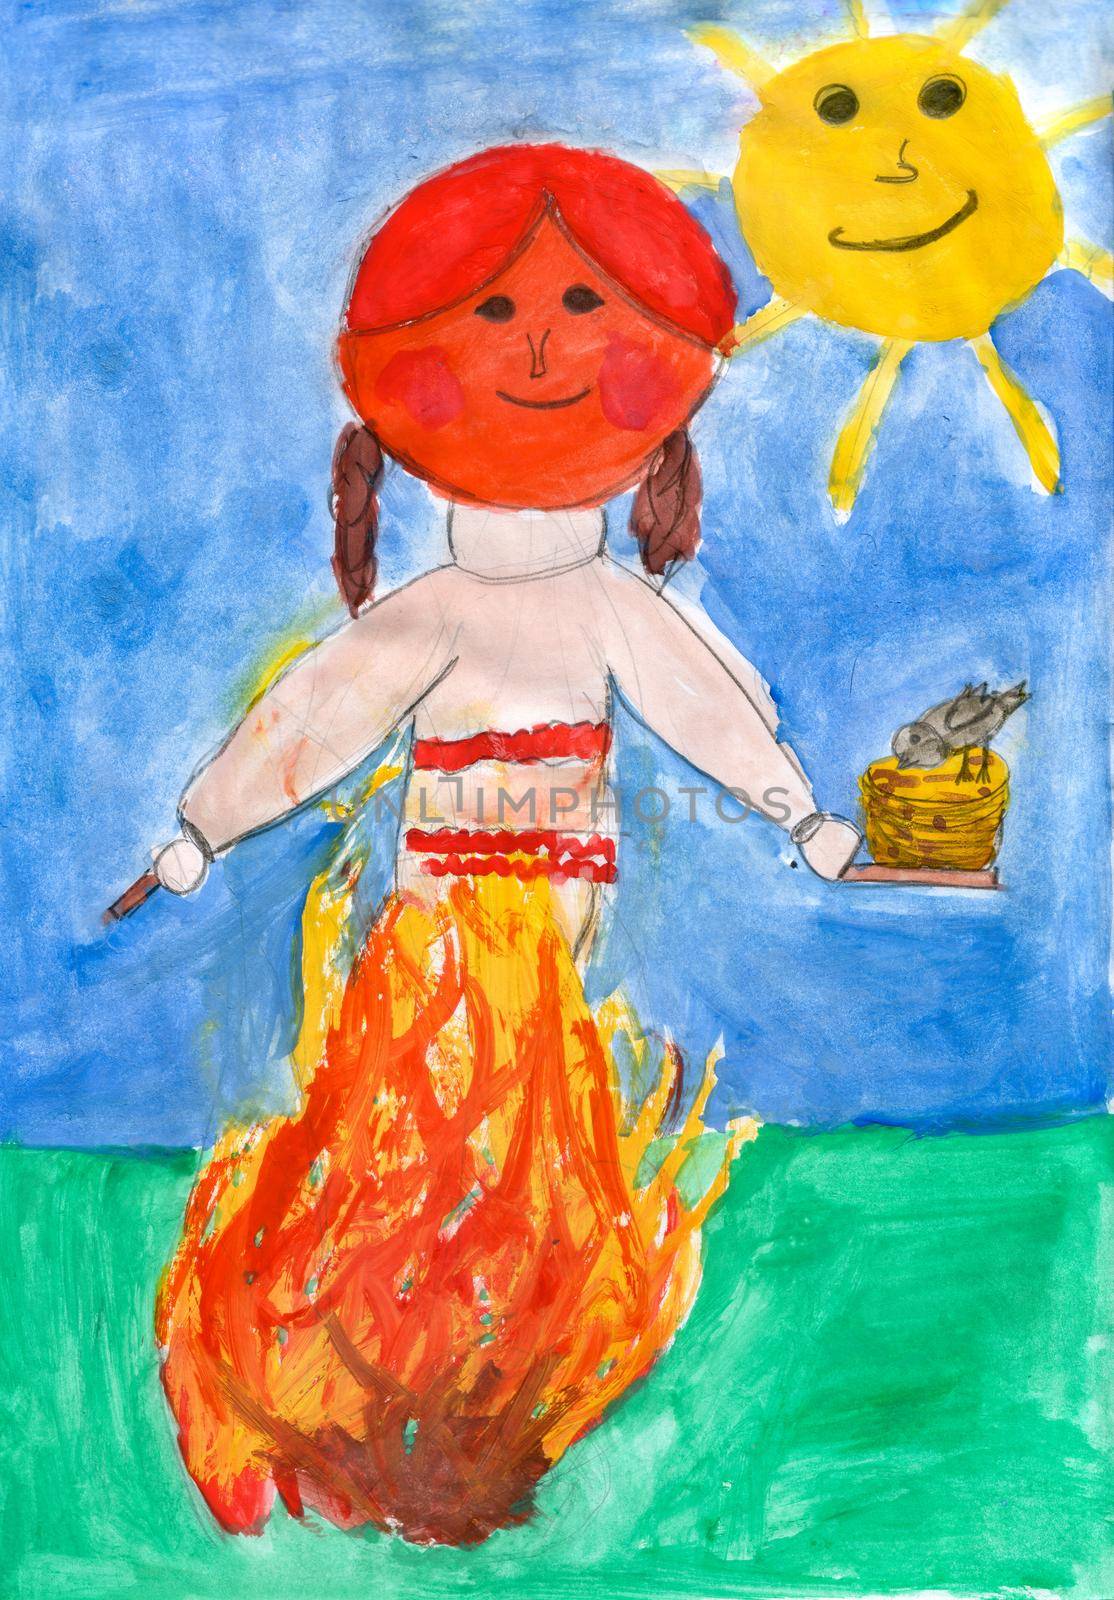 Children's drawing - burning a stuffed carnival at the celebration, in the hands of a stuffed plate with pancakes, in the background the sun